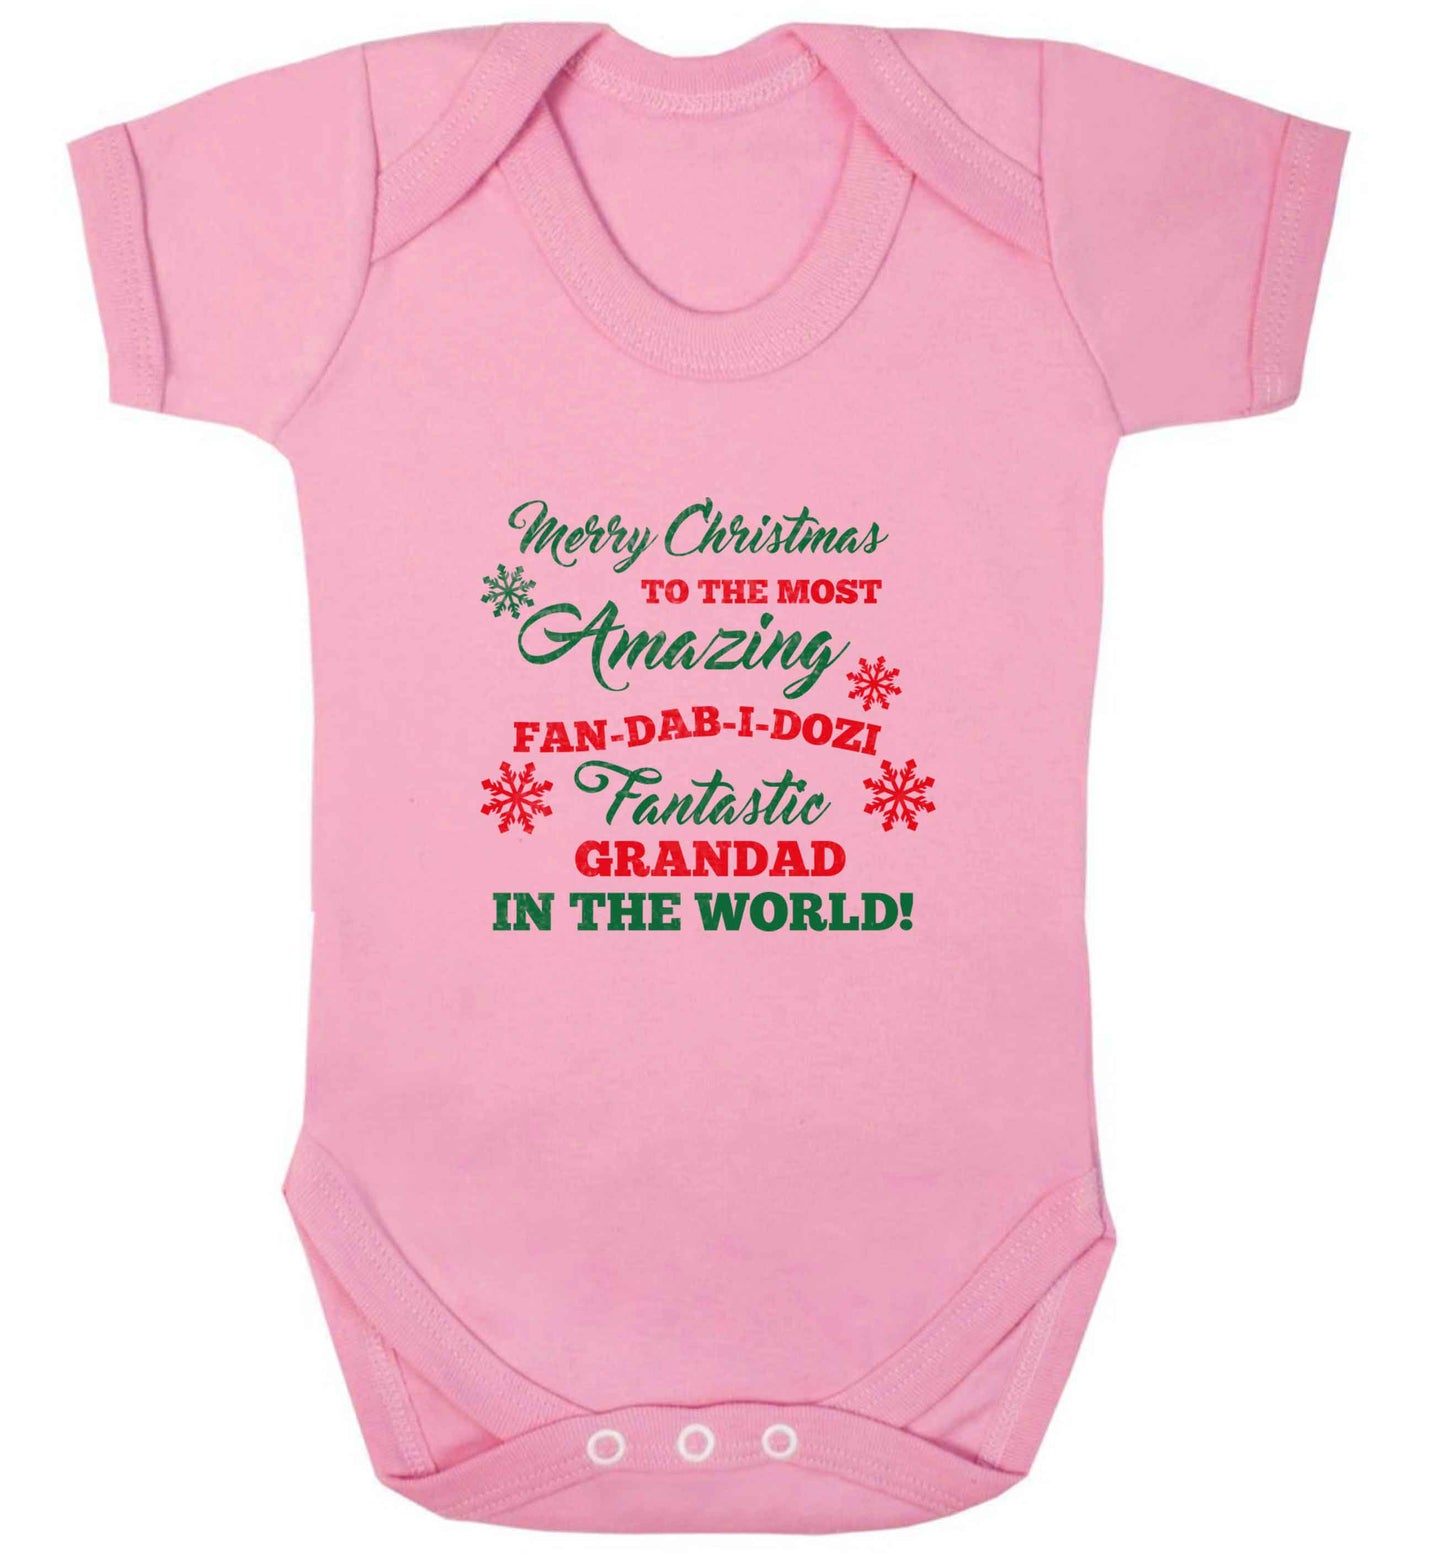 Merry Christmas to the most amazing fan-dab-i-dozi fantasic Grandad in the world baby vest pale pink 18-24 months